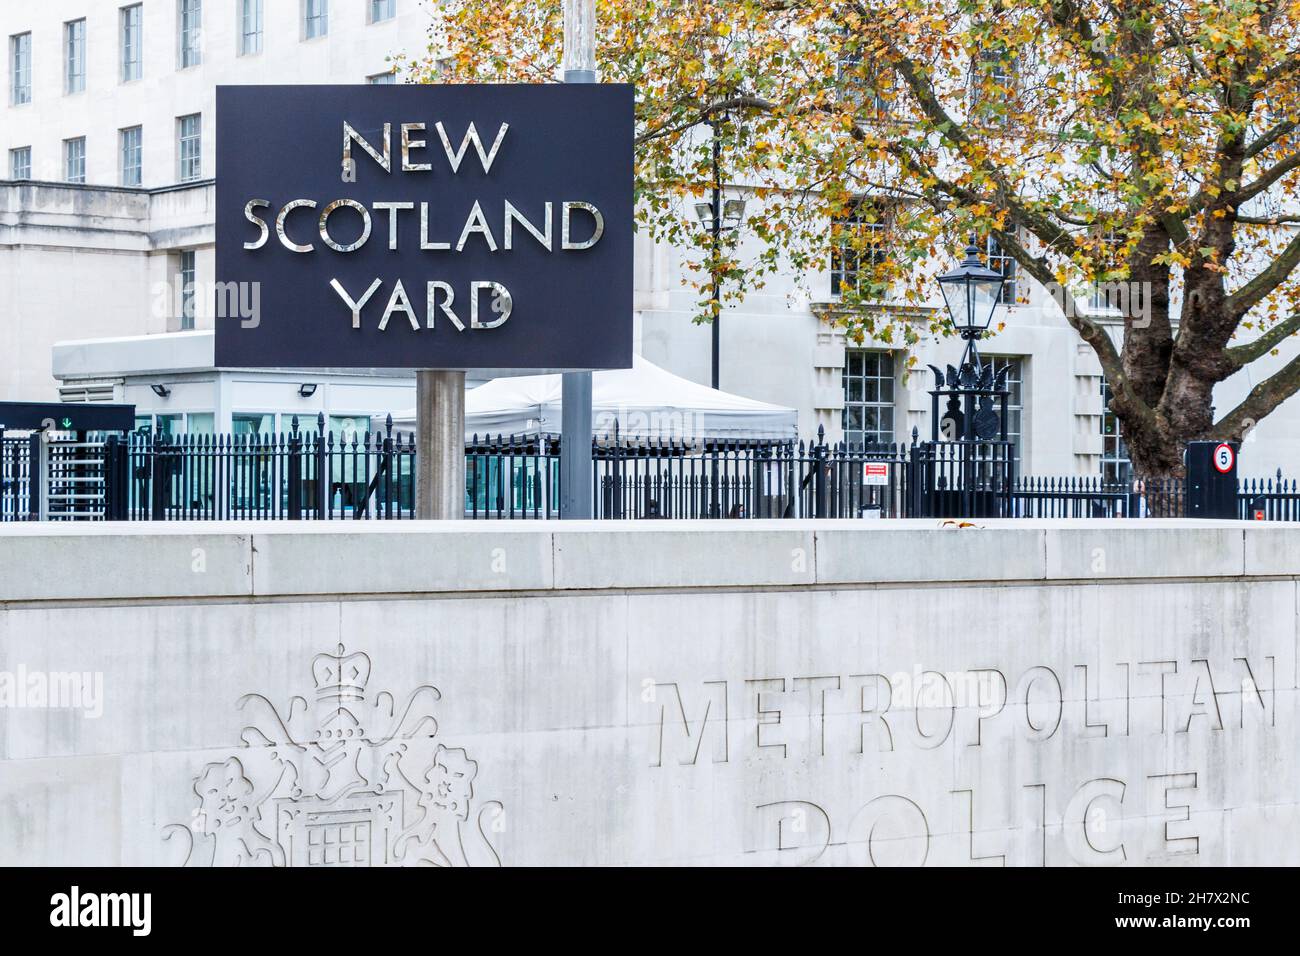 The iconic rotating sign outside New Scotland Yard, the headquarters of the Metropolitan Police, Victoria Embankment, London, UK Stock Photo